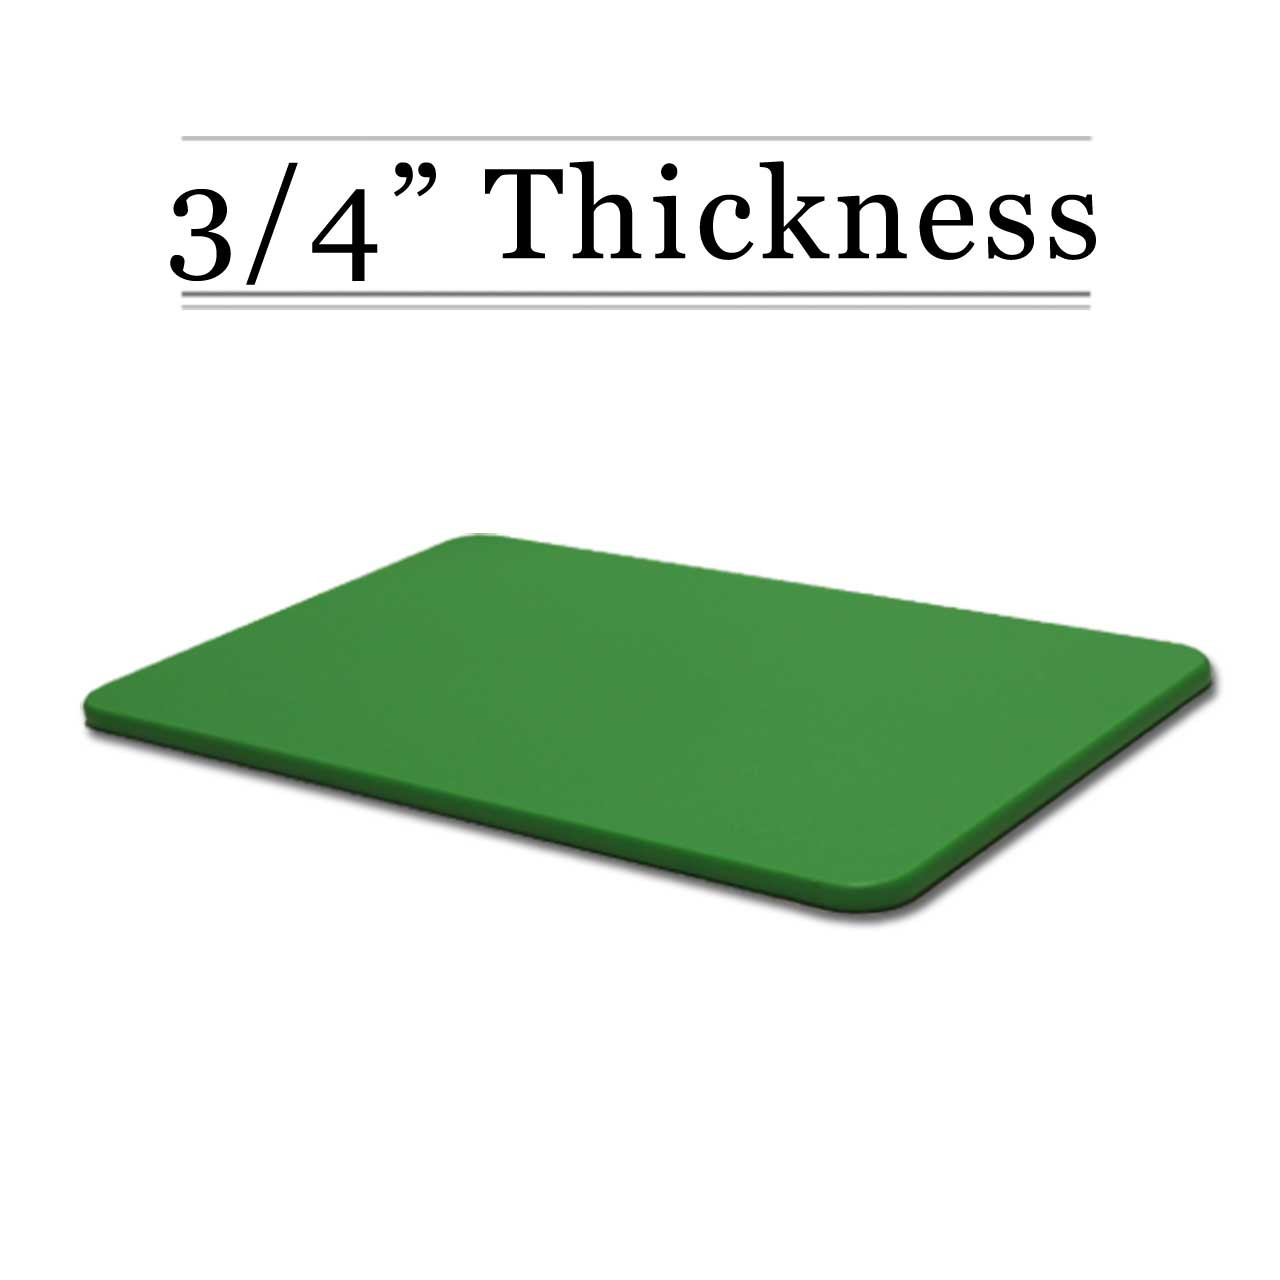 3/4 Thick Green Custom Cutting Board - Cutting Board Company - Commercial  Quality Plastic and Richlite Custom Sized Cutting Boards